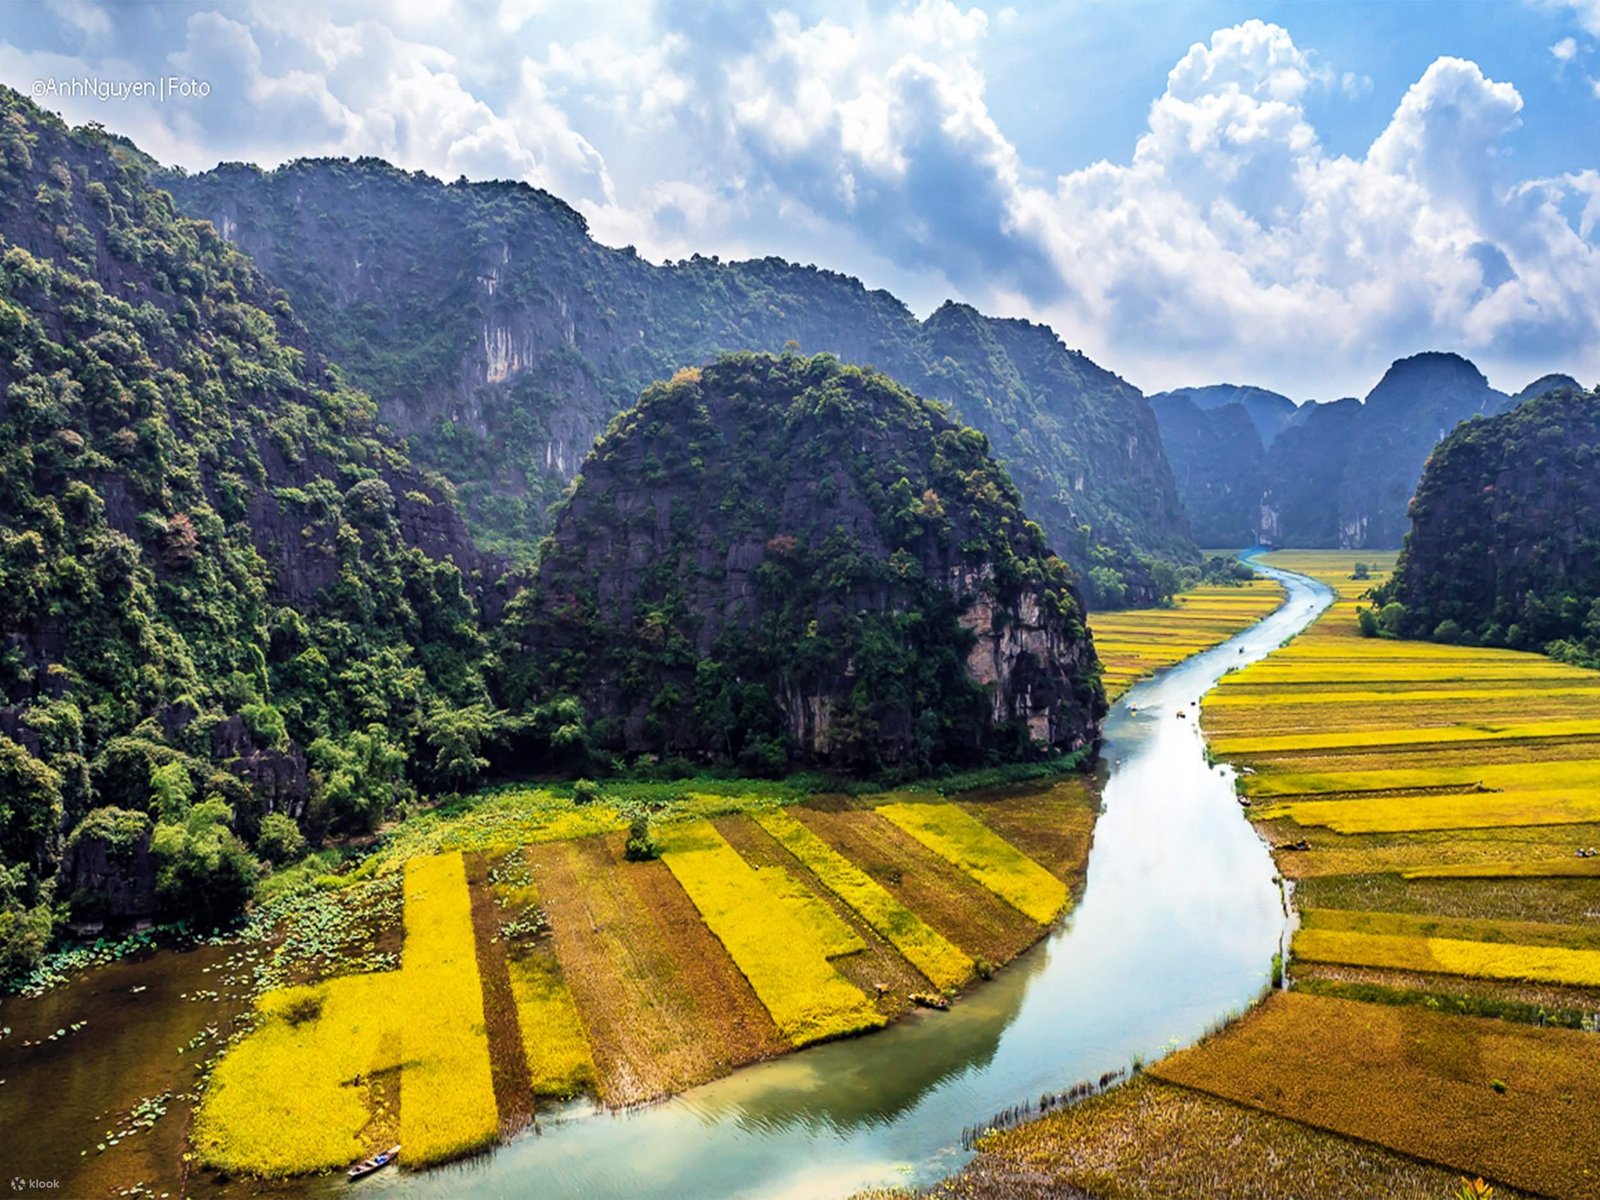 Tam Coc Boat Tour: Exploring Caves, Pagodas & Stunning Scenery